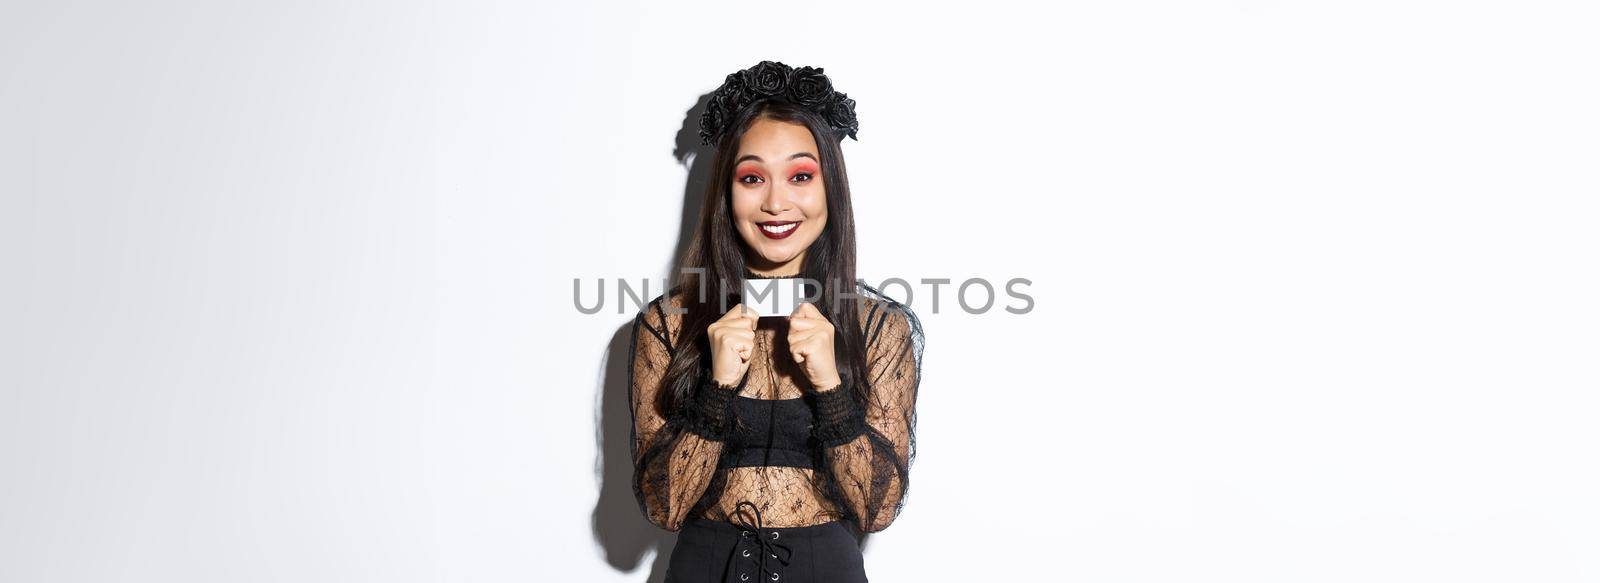 Excited smiling asian girl in black wreath and gothic witch costume showing credit card, standing over white background.